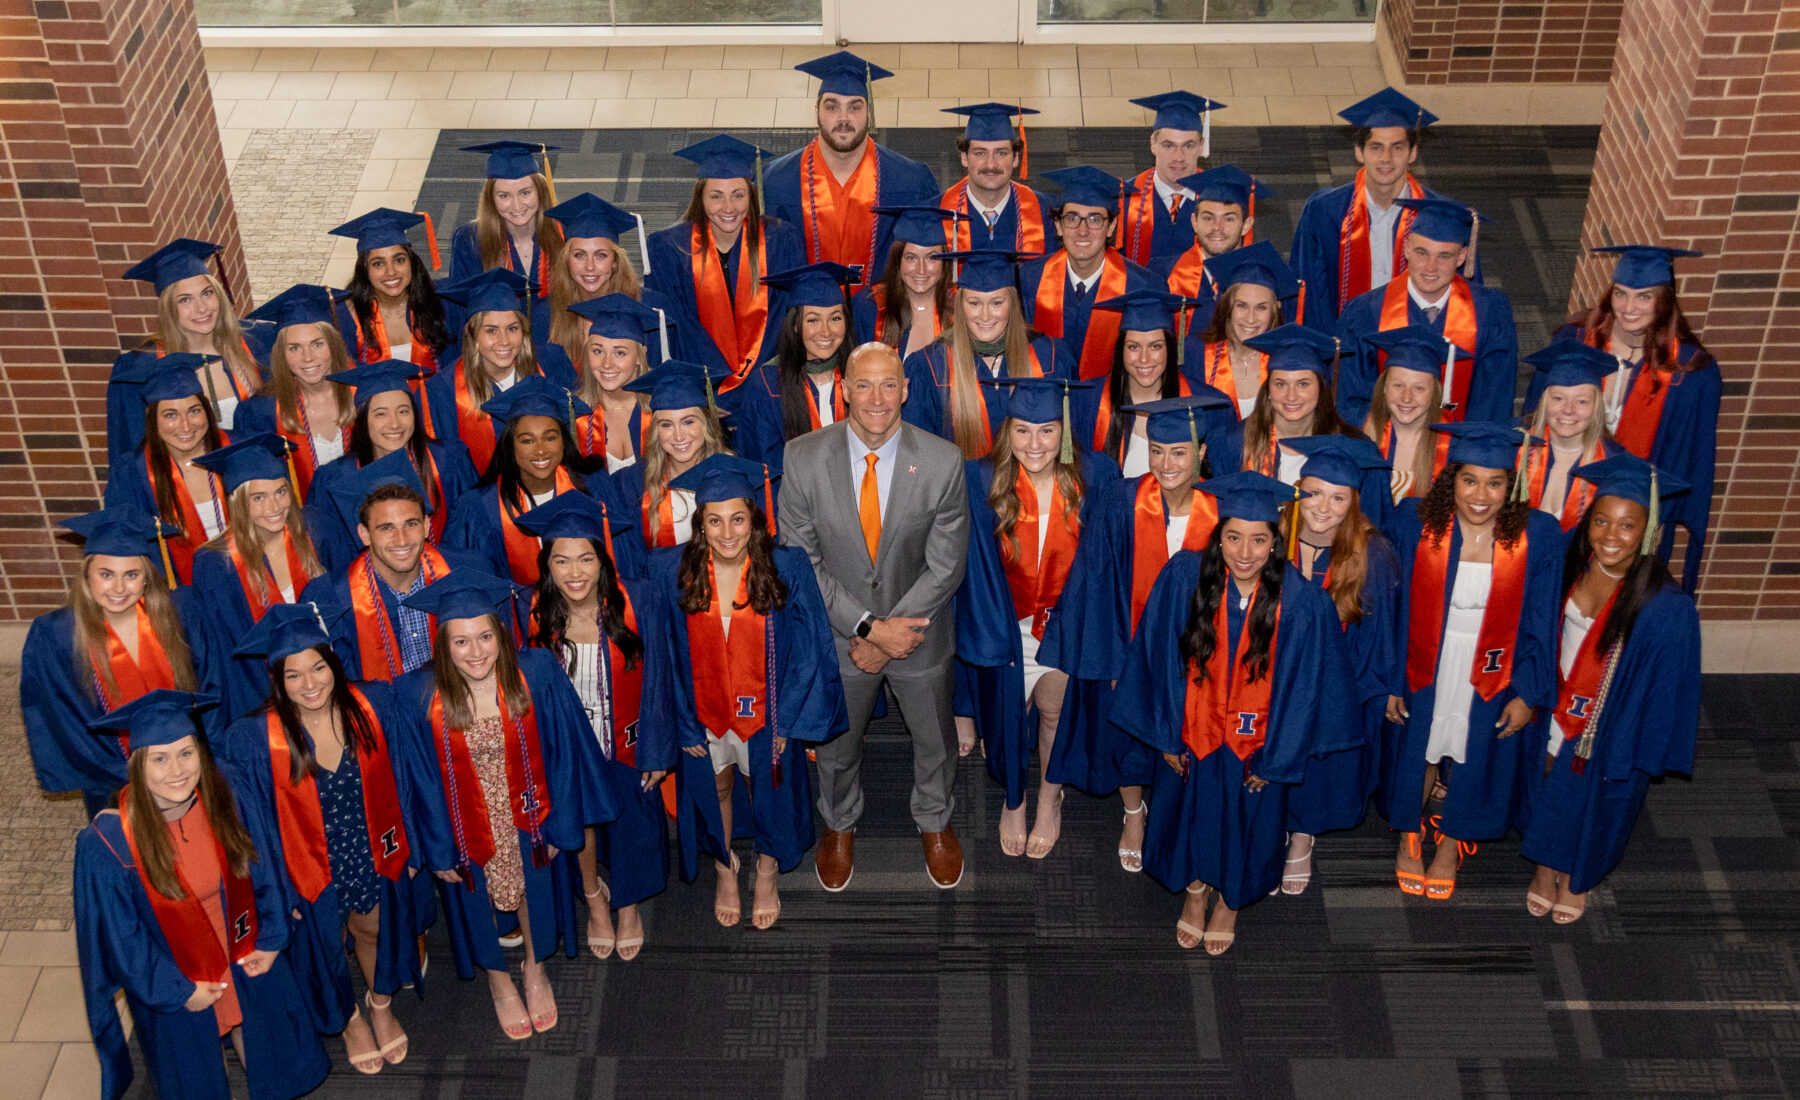 Josh Whitman and graduated Illinois women's athletes standing and smiling together.